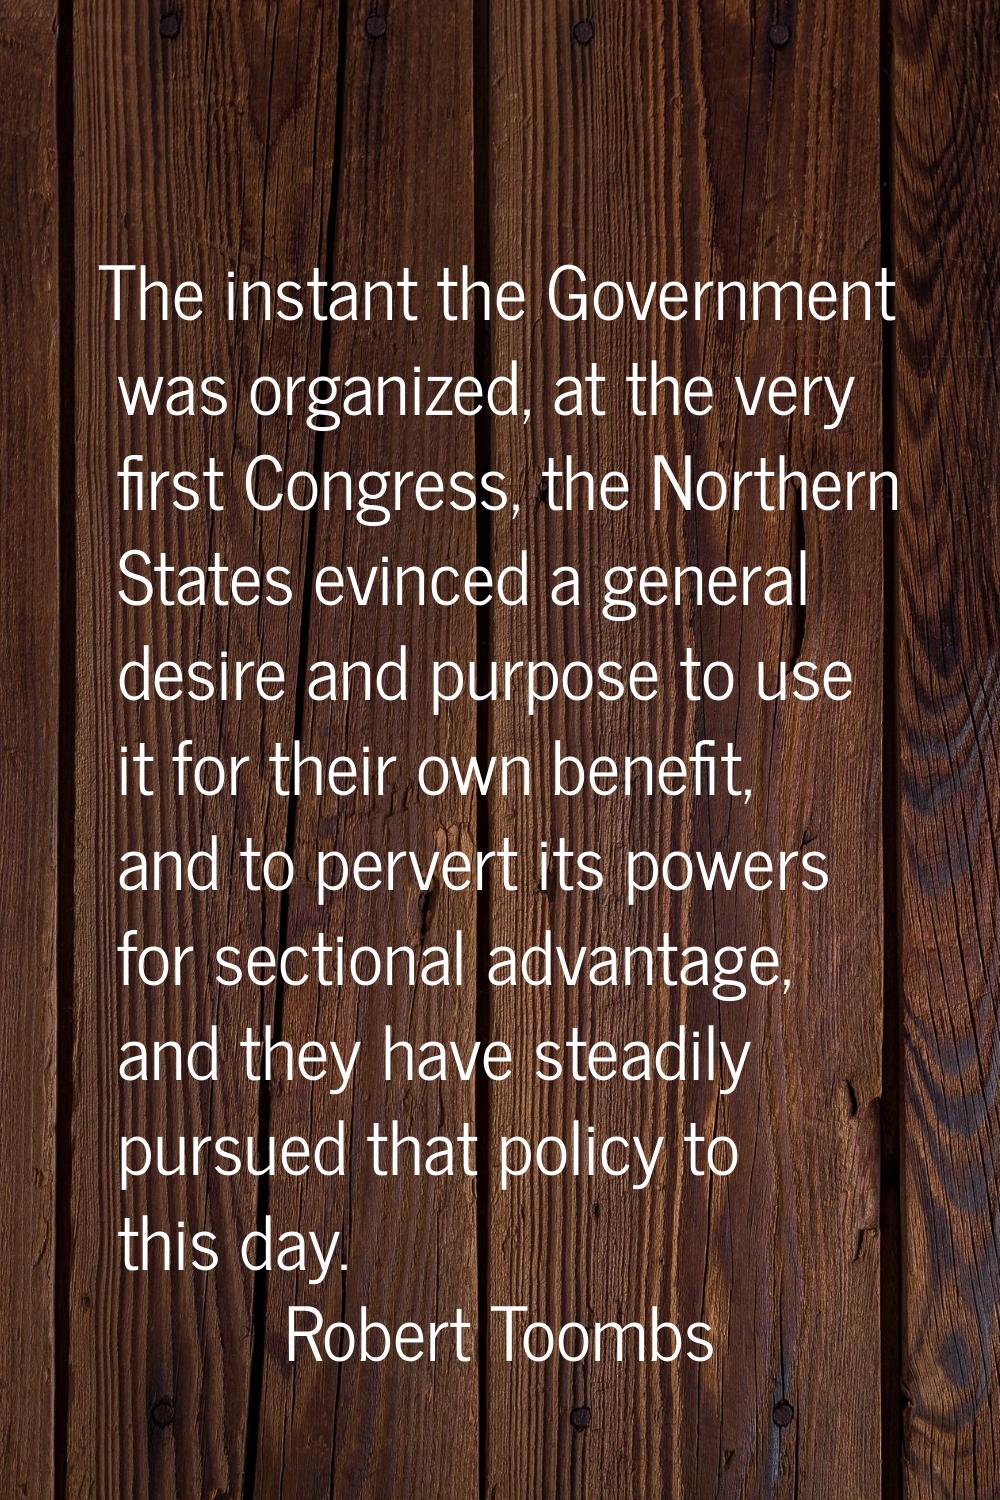 The instant the Government was organized, at the very first Congress, the Northern States evinced a